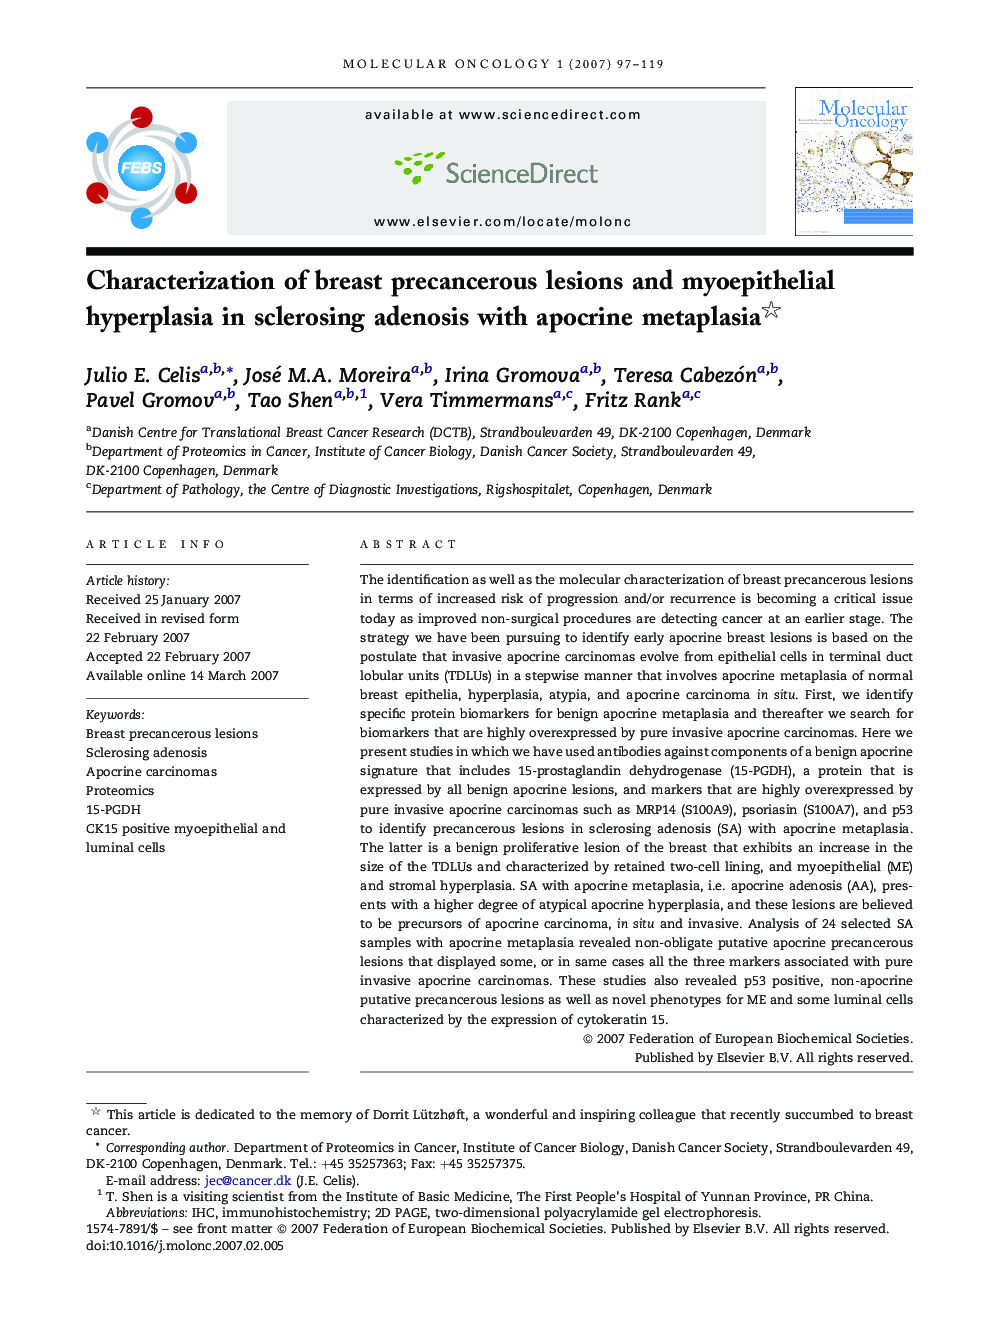 Characterization of breast precancerous lesions and myoepithelial hyperplasia in sclerosing adenosis with apocrine metaplasia 